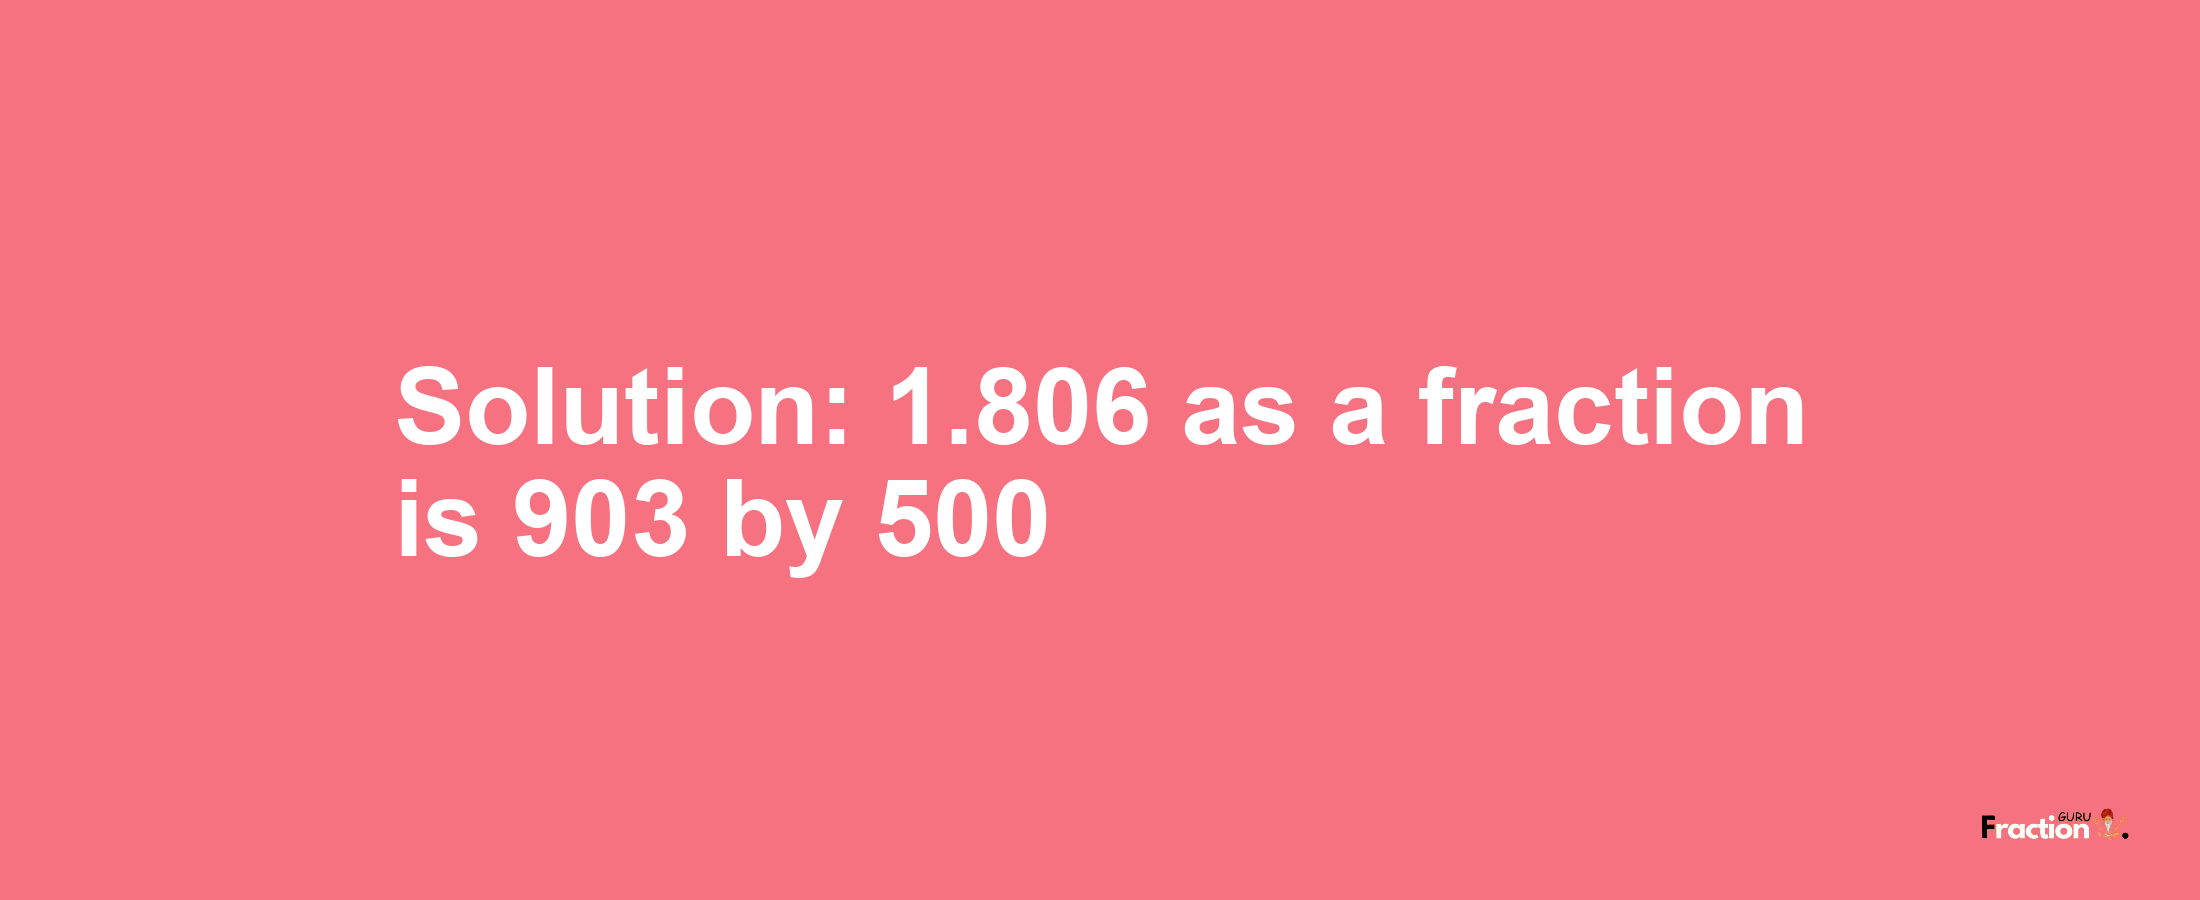 Solution:1.806 as a fraction is 903/500